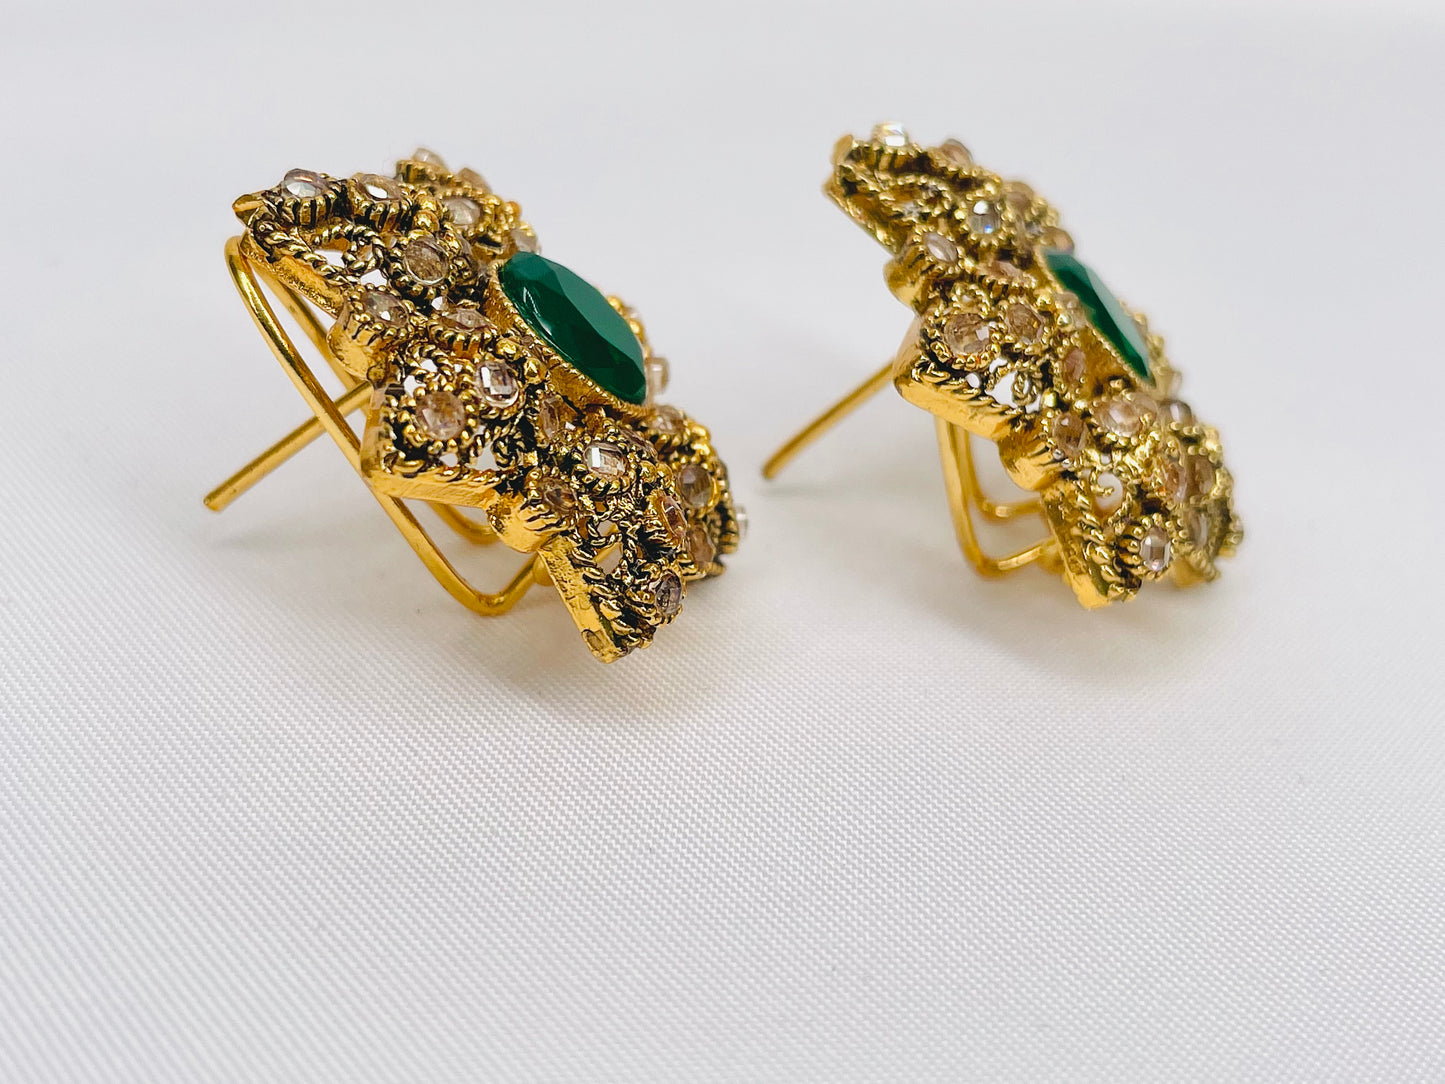 Antique Gold Star Shaped Emerald And Champagne Earrings